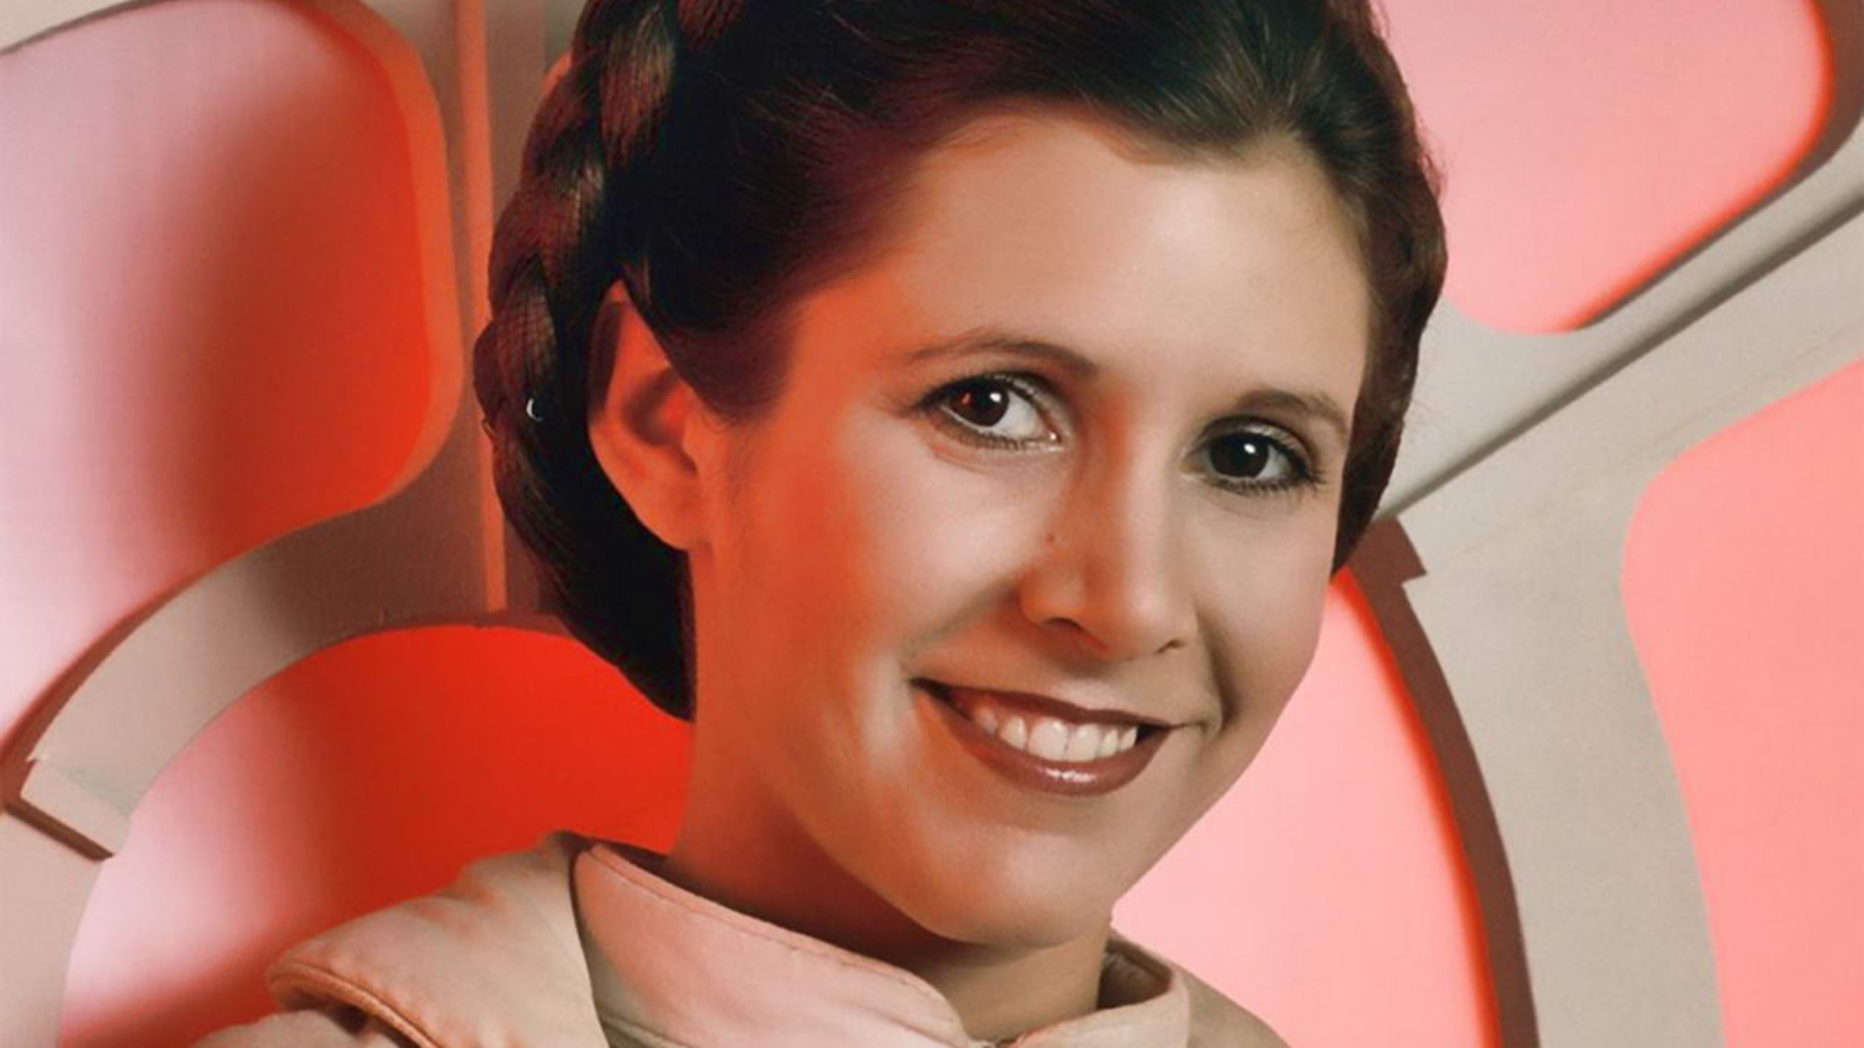 carrie-fisher-ep5-sm1.jpg